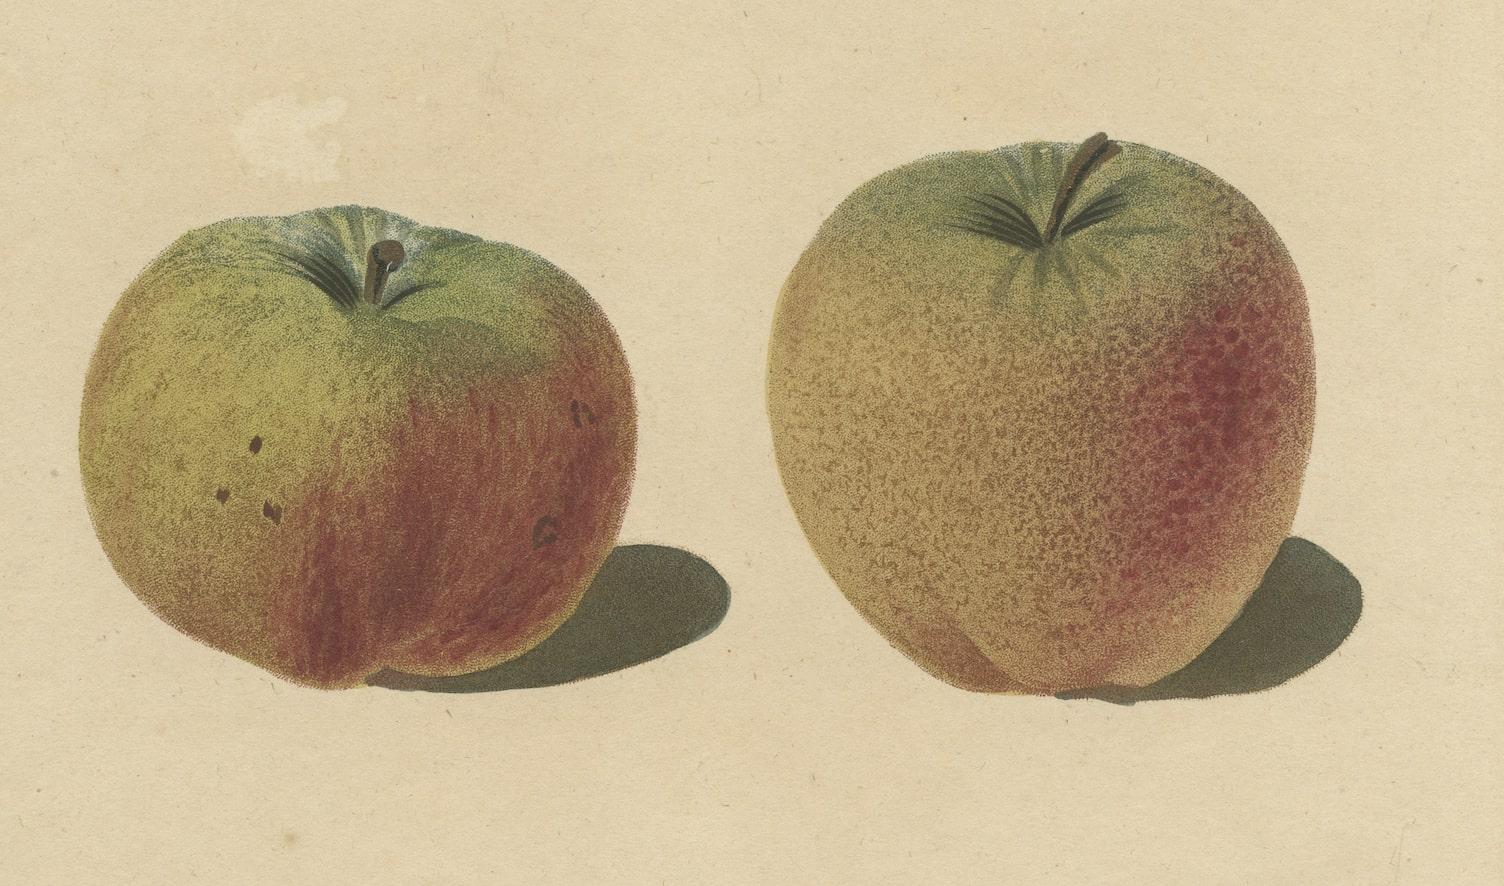 Paper Antique Print of Pomme d'Api, Padly's Pippin and Bigg's Nonsuch Apples For Sale